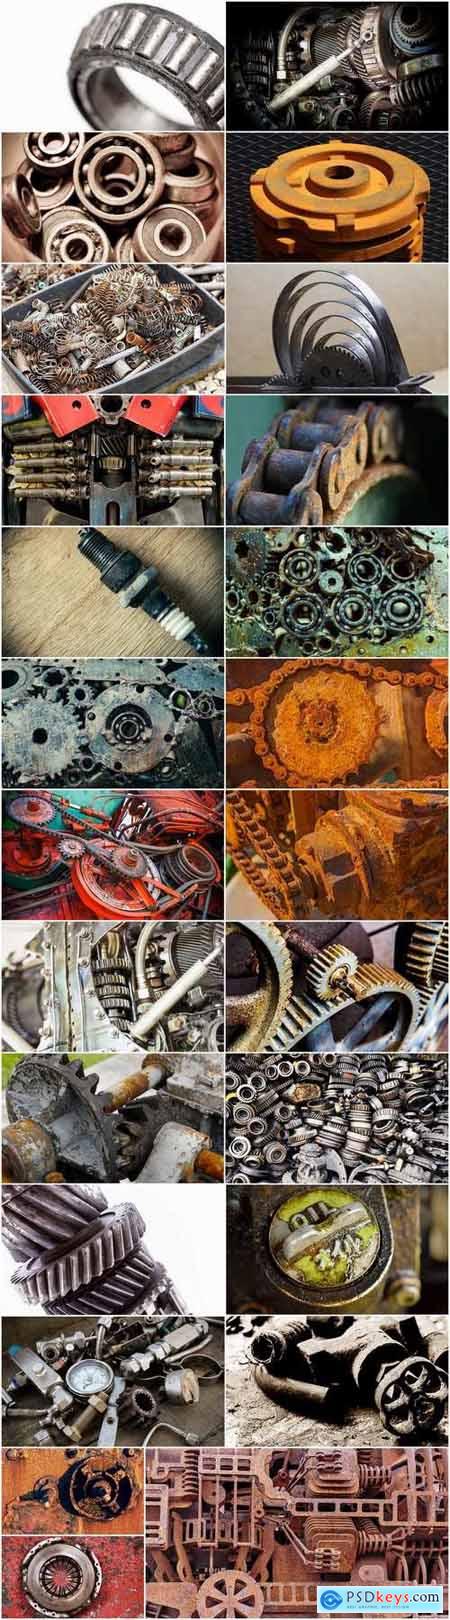 Vintage gear with rust 25 HQ Jpeg